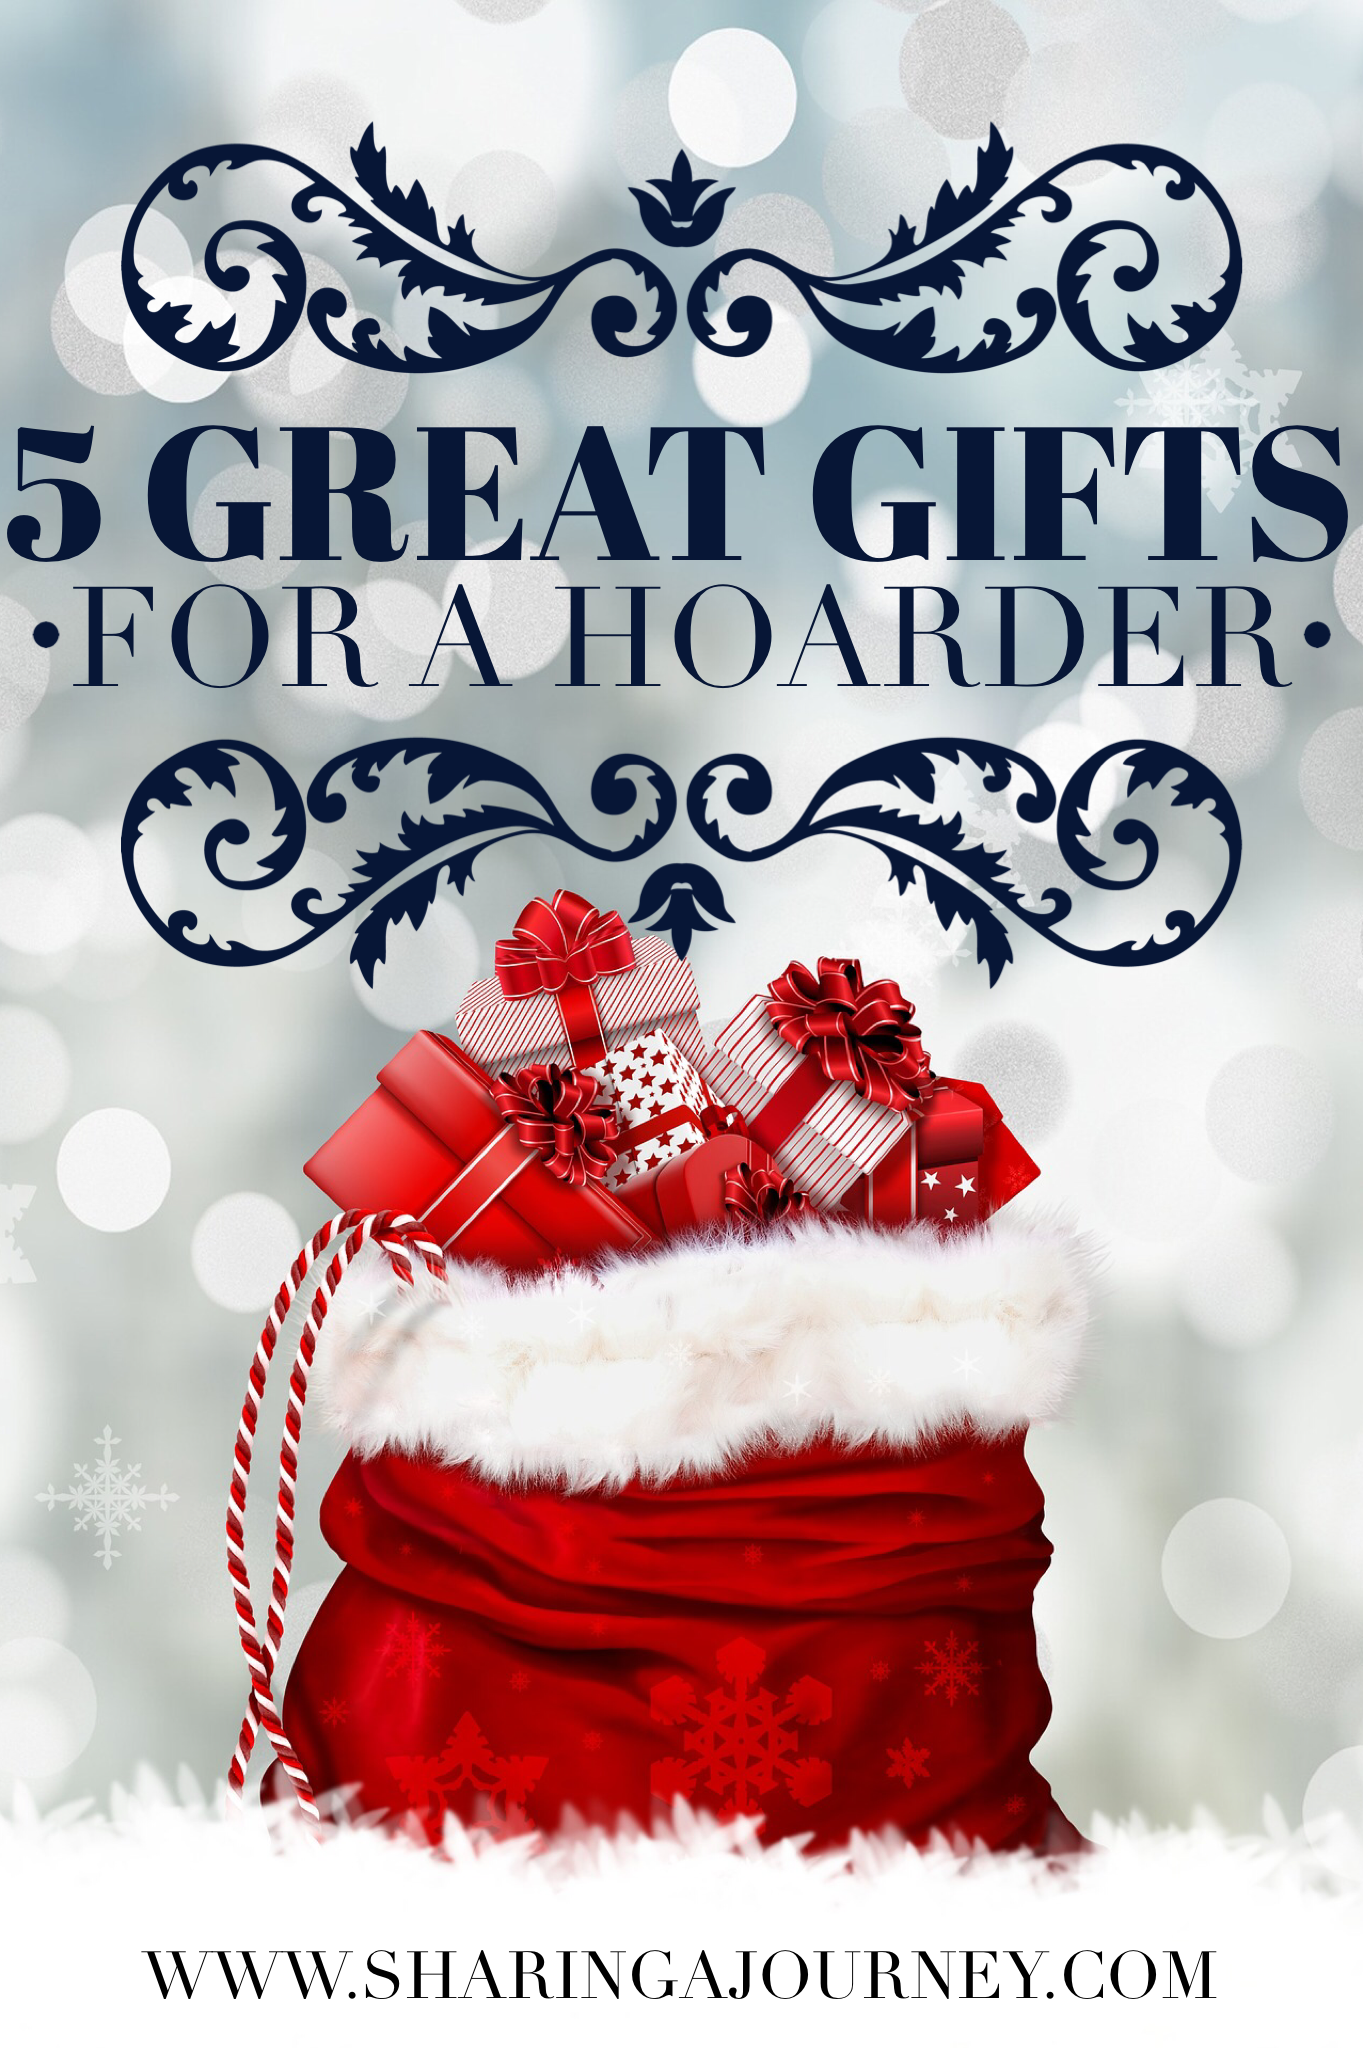 Top 5 Best Gifts for Hoarders featured by top US over 50 lifestyle blog, Sharing a Journey.